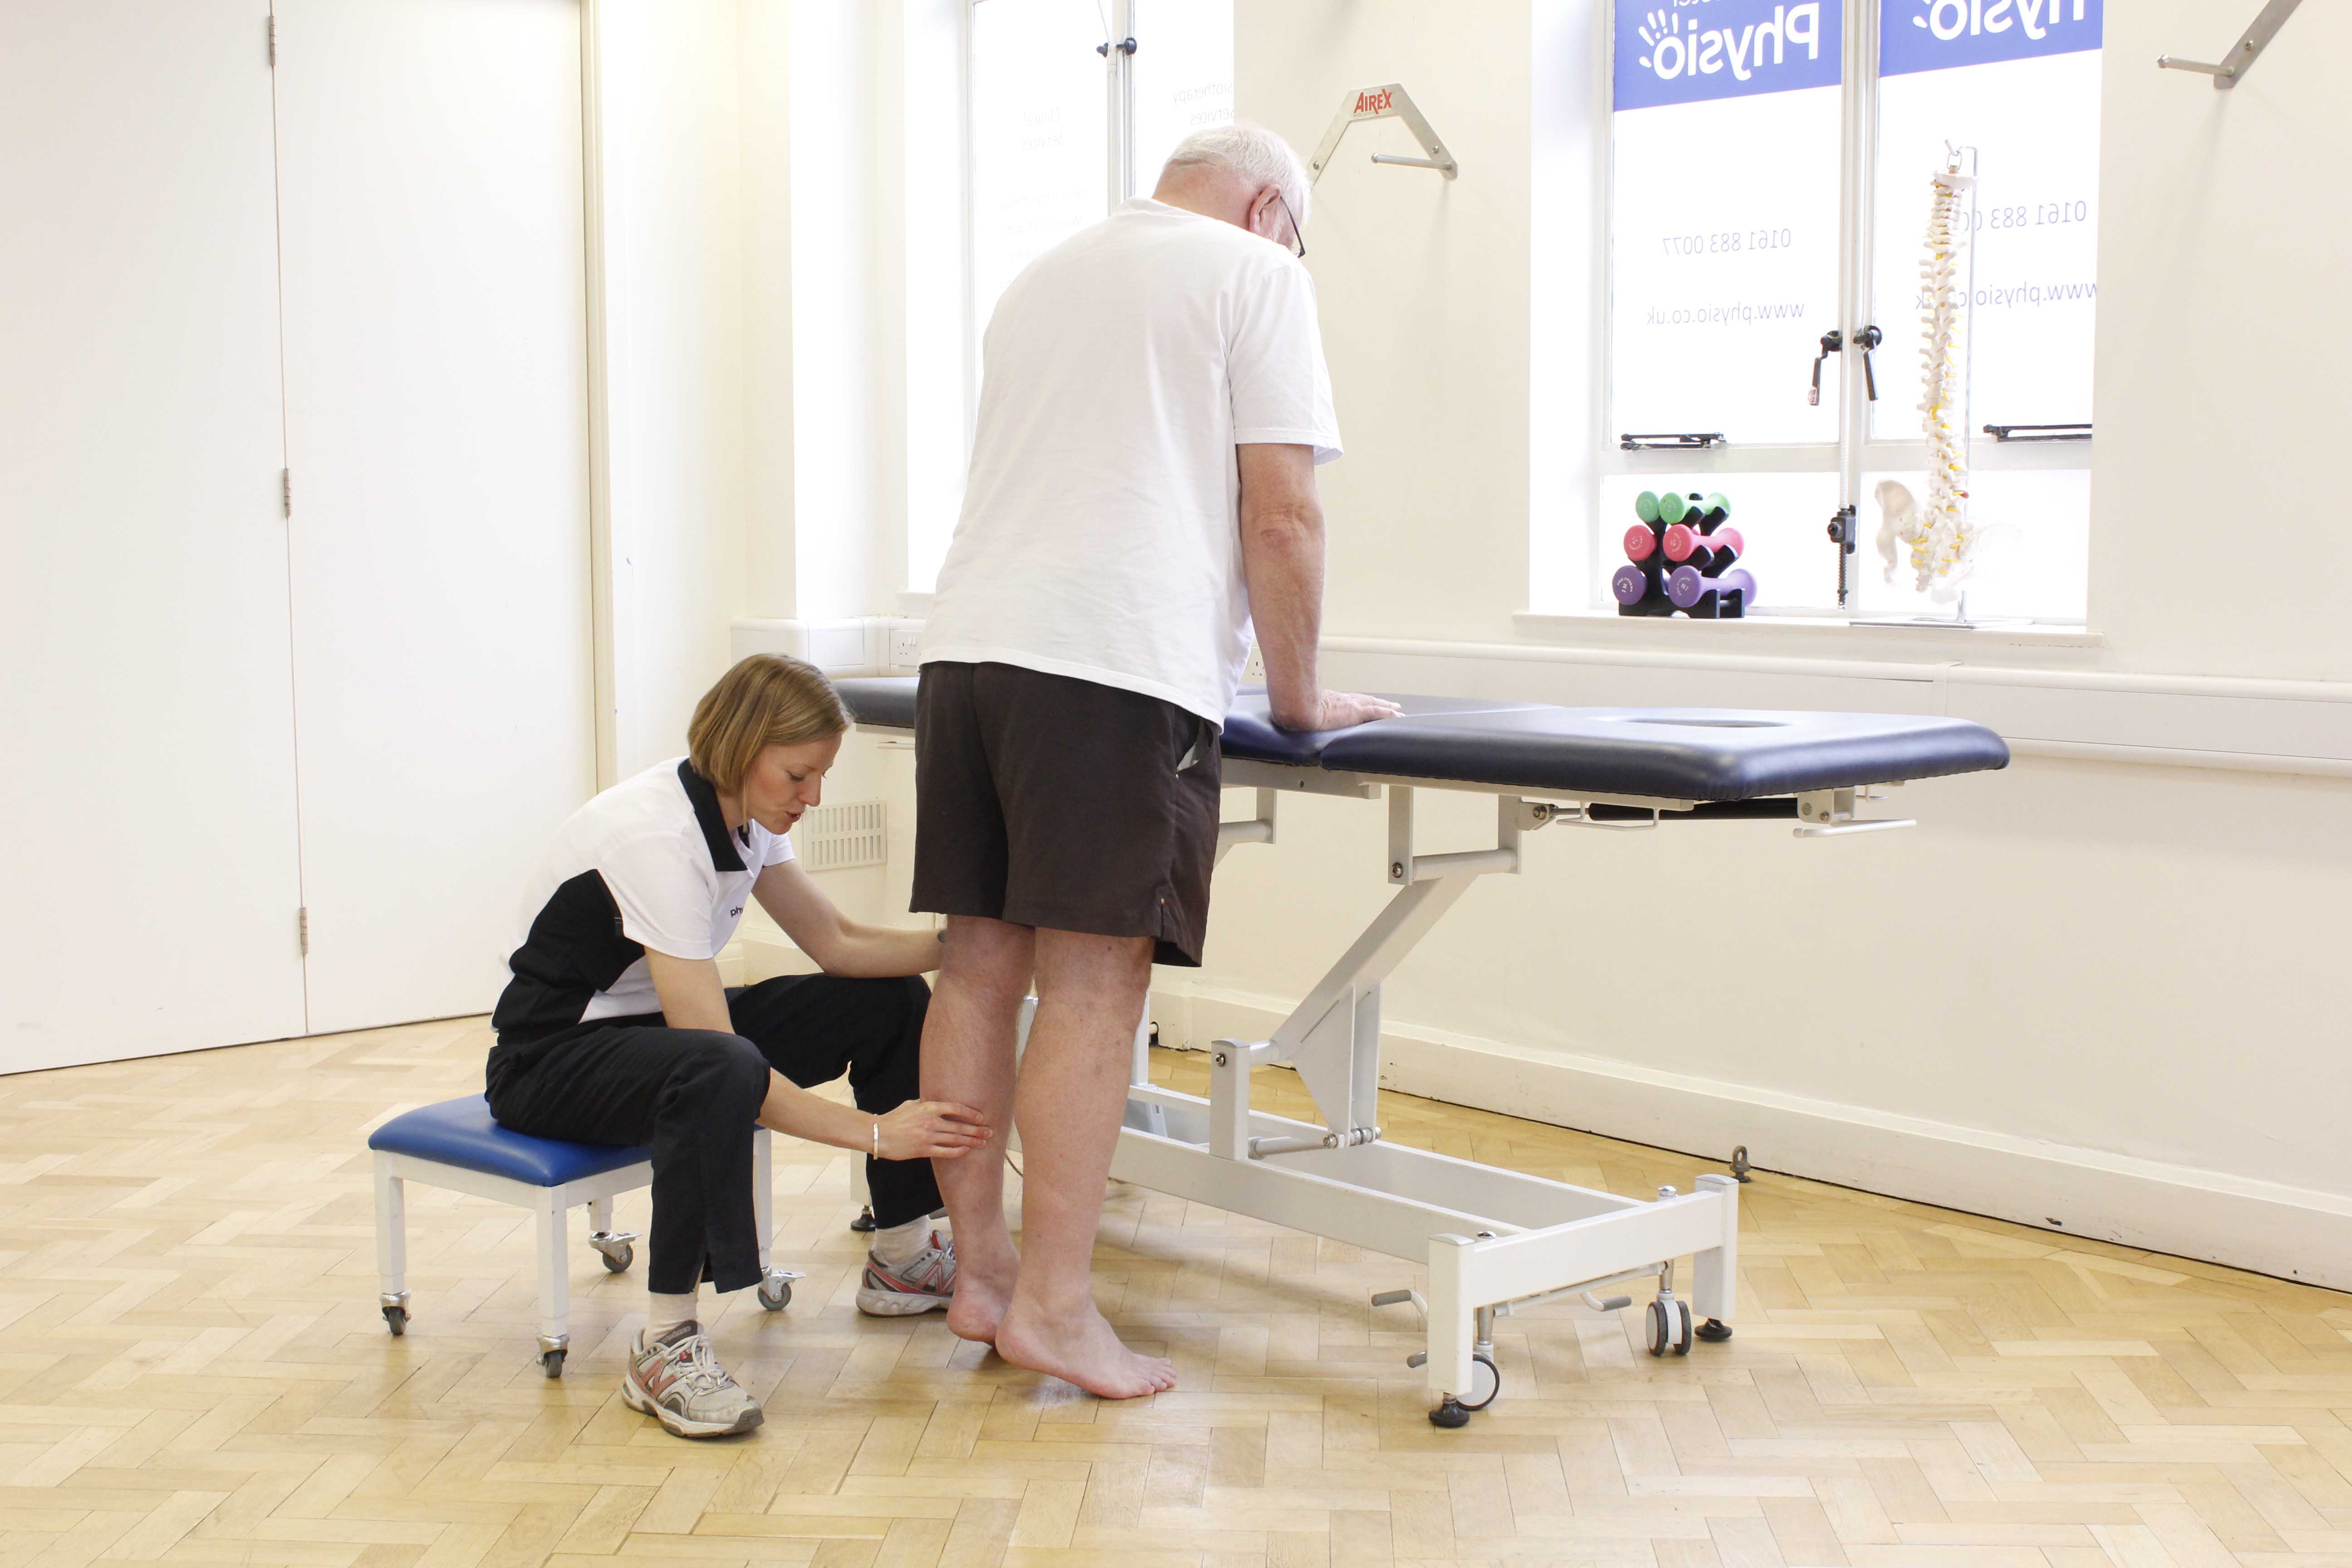 Progressive strengthening exercises for the foot and ankle, supervised by specialist physiotherapist